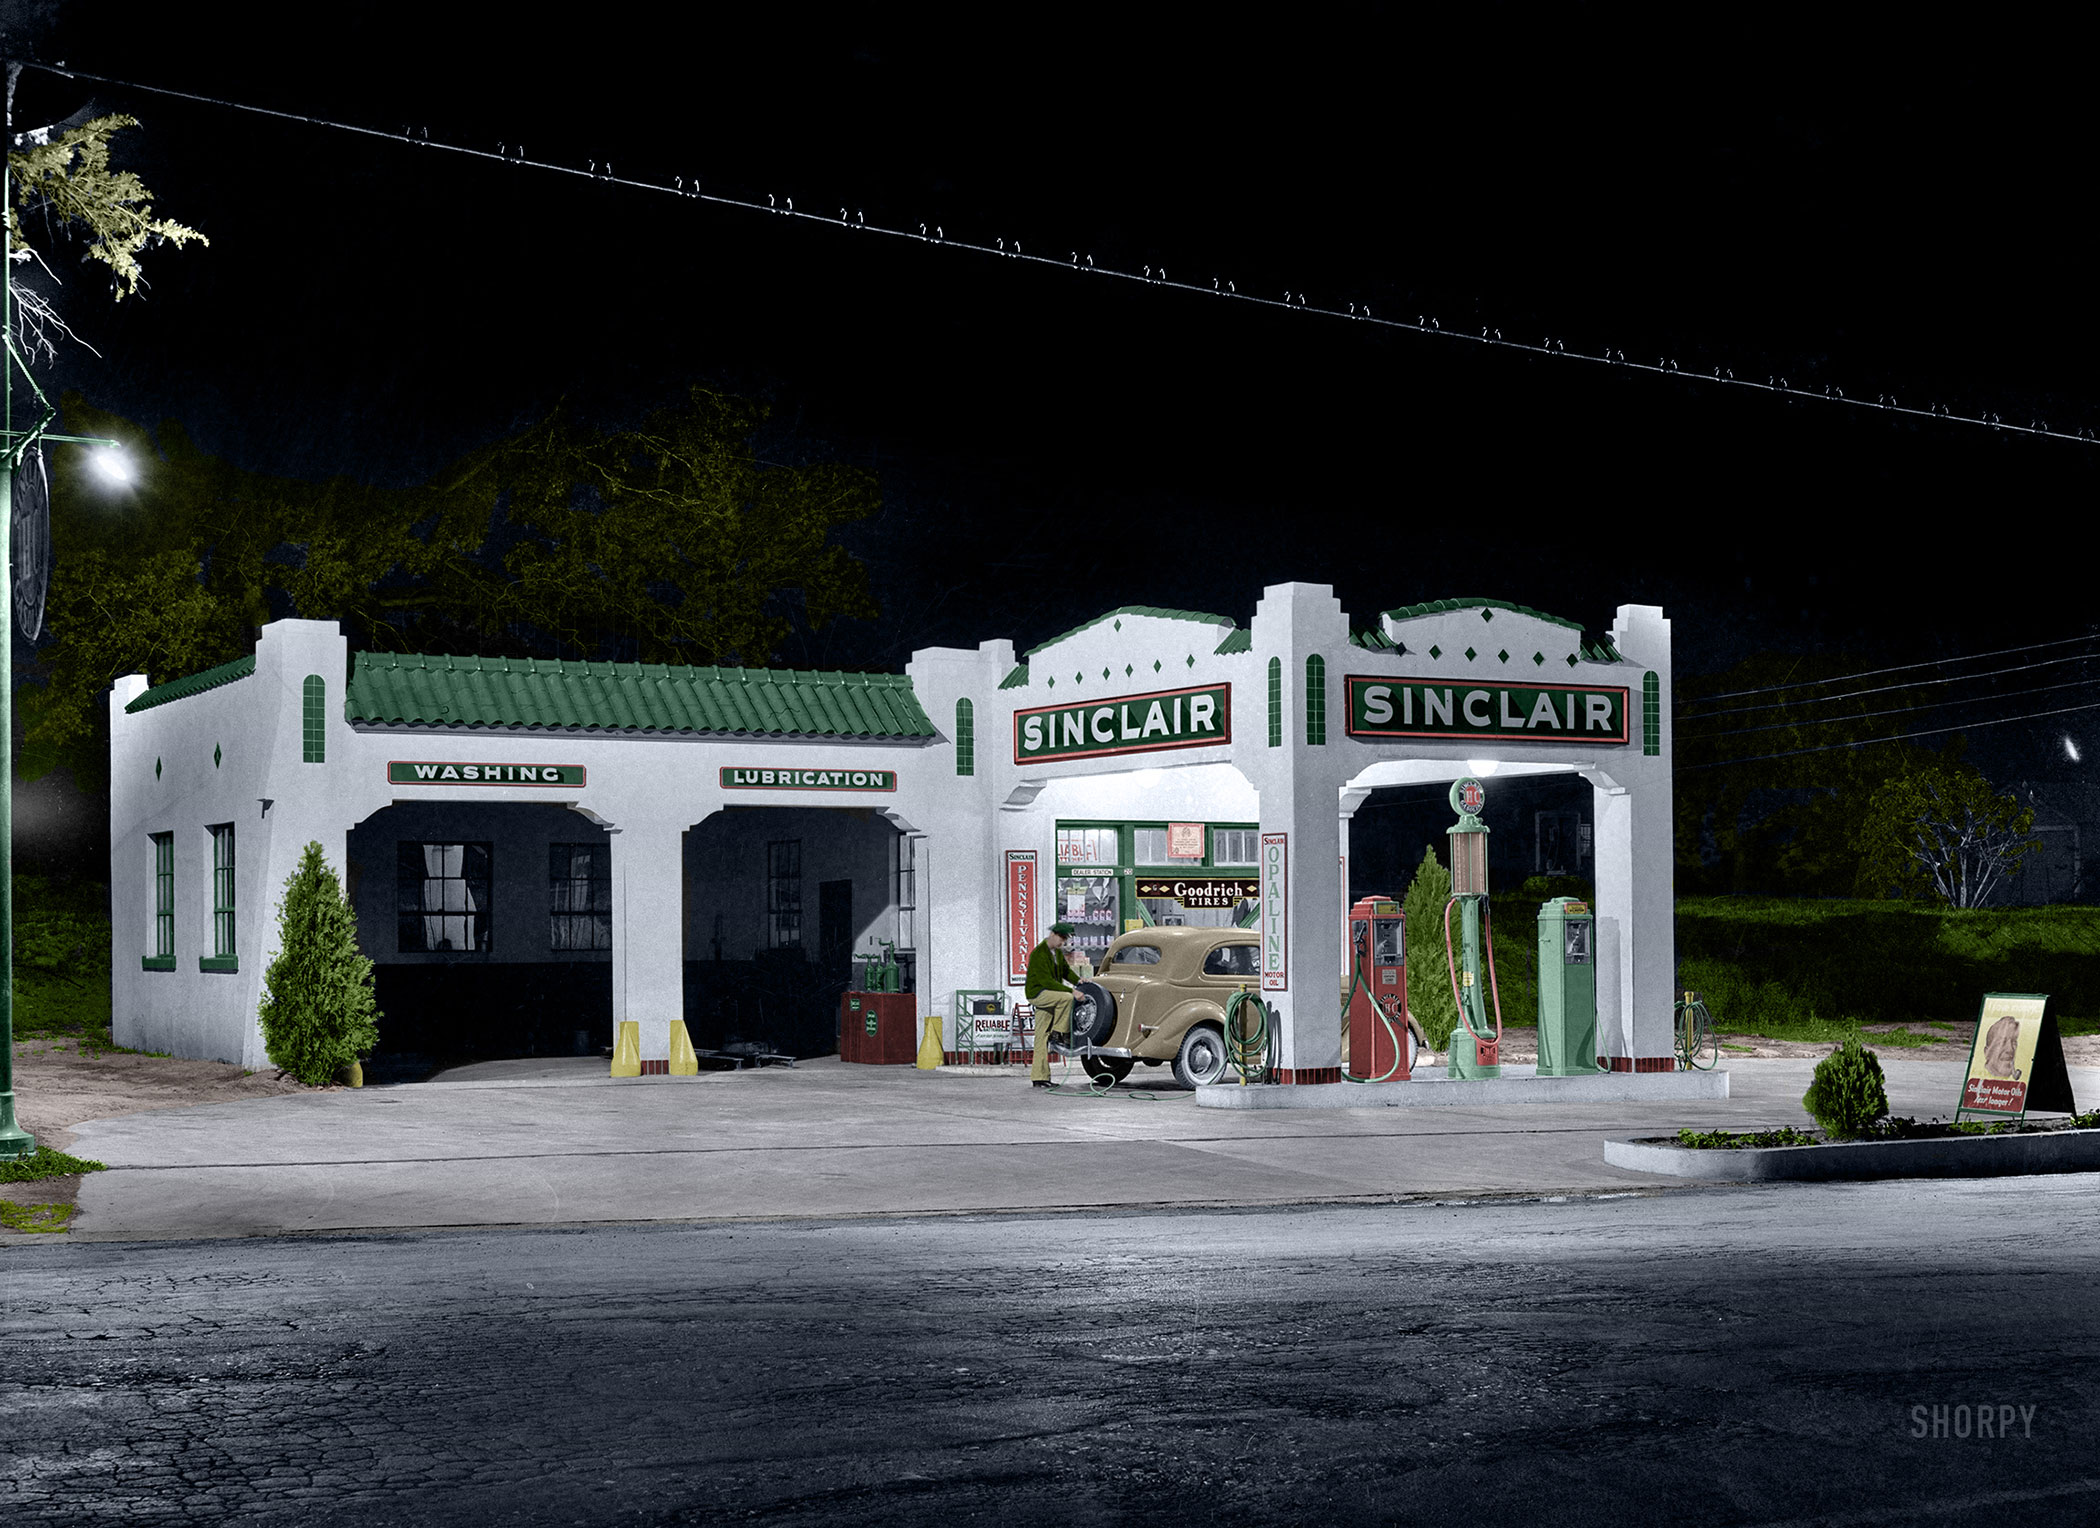 My colorized version of the Shorpy original Night Service.